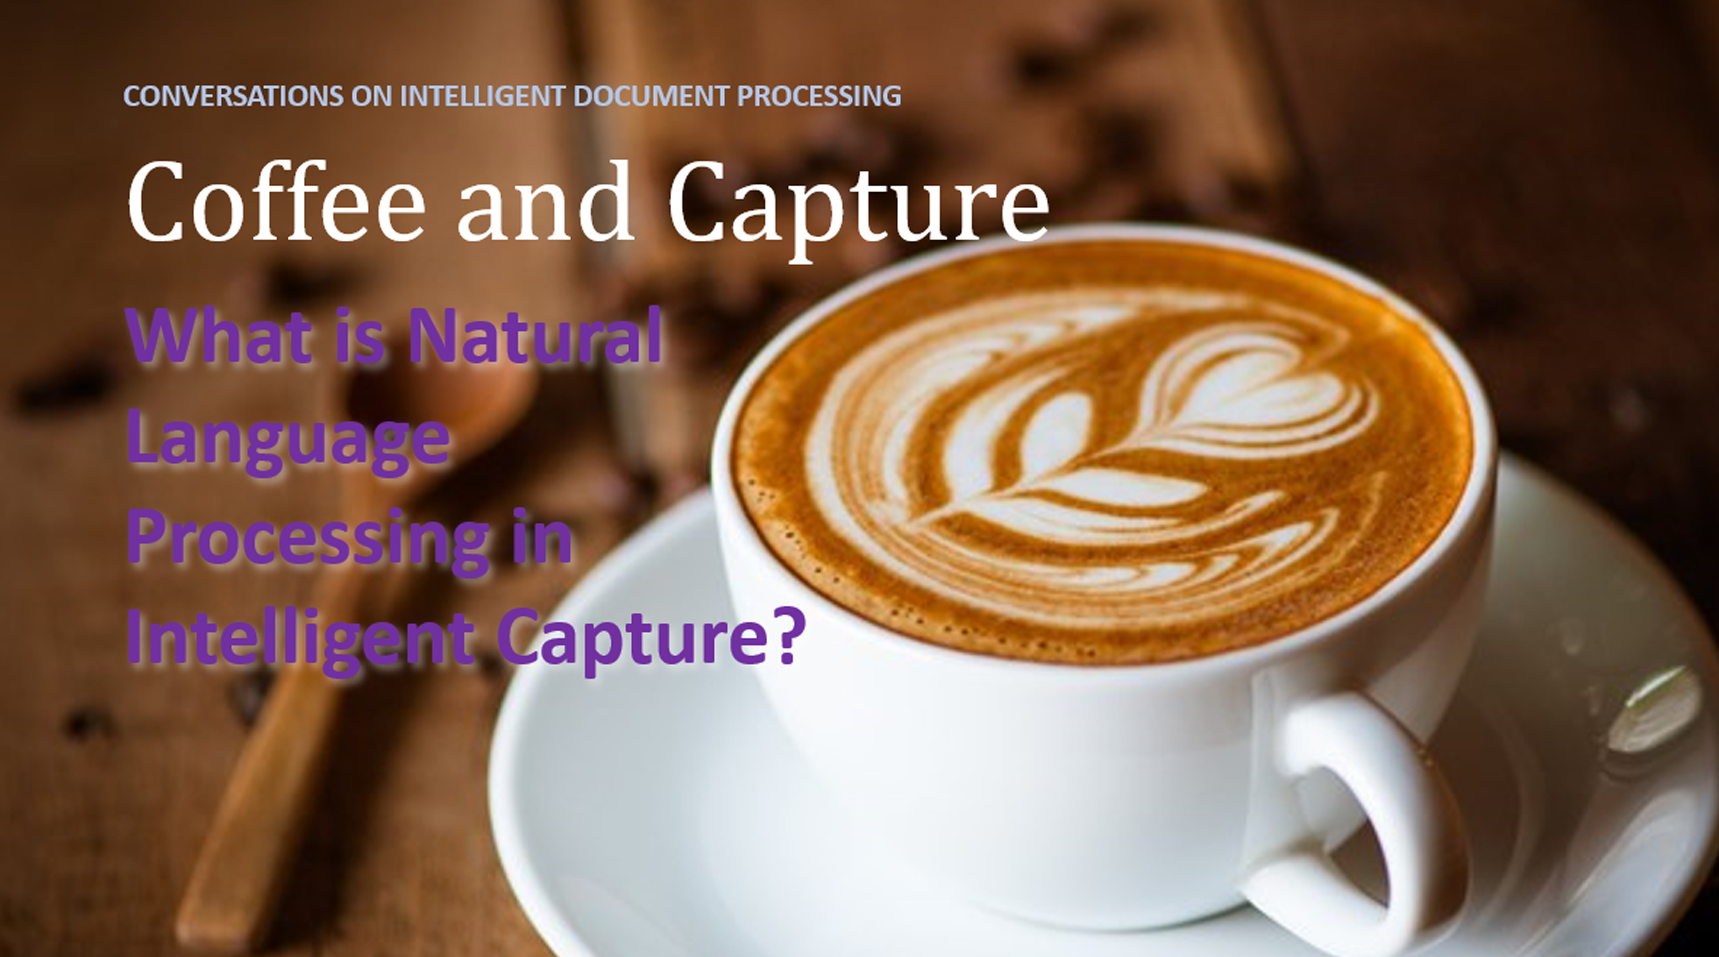 What Does NLP Mean for Intelligent Capture?